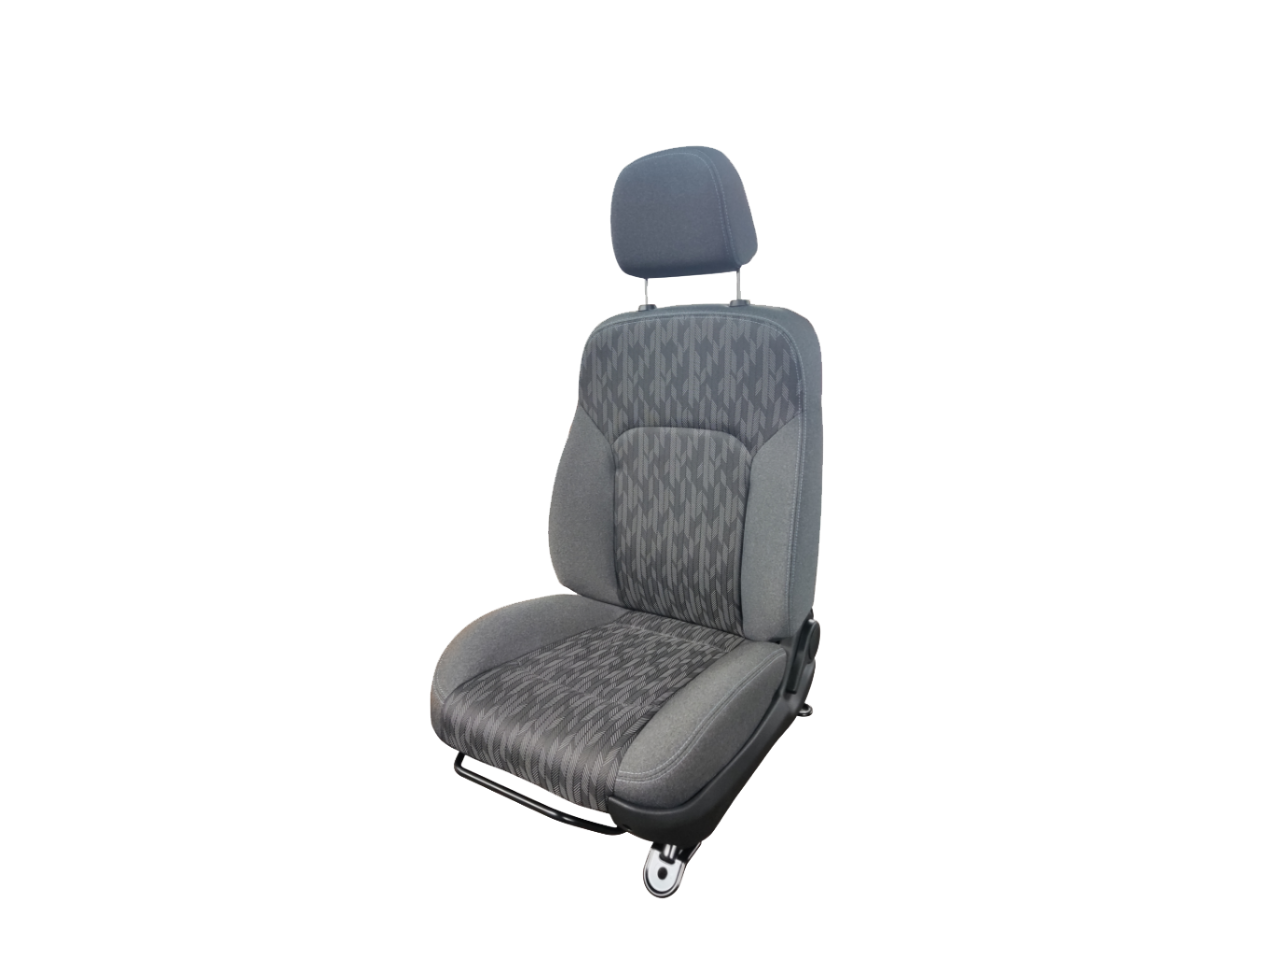 Light Truck YTST01A Driver Seat without Shock Absorption